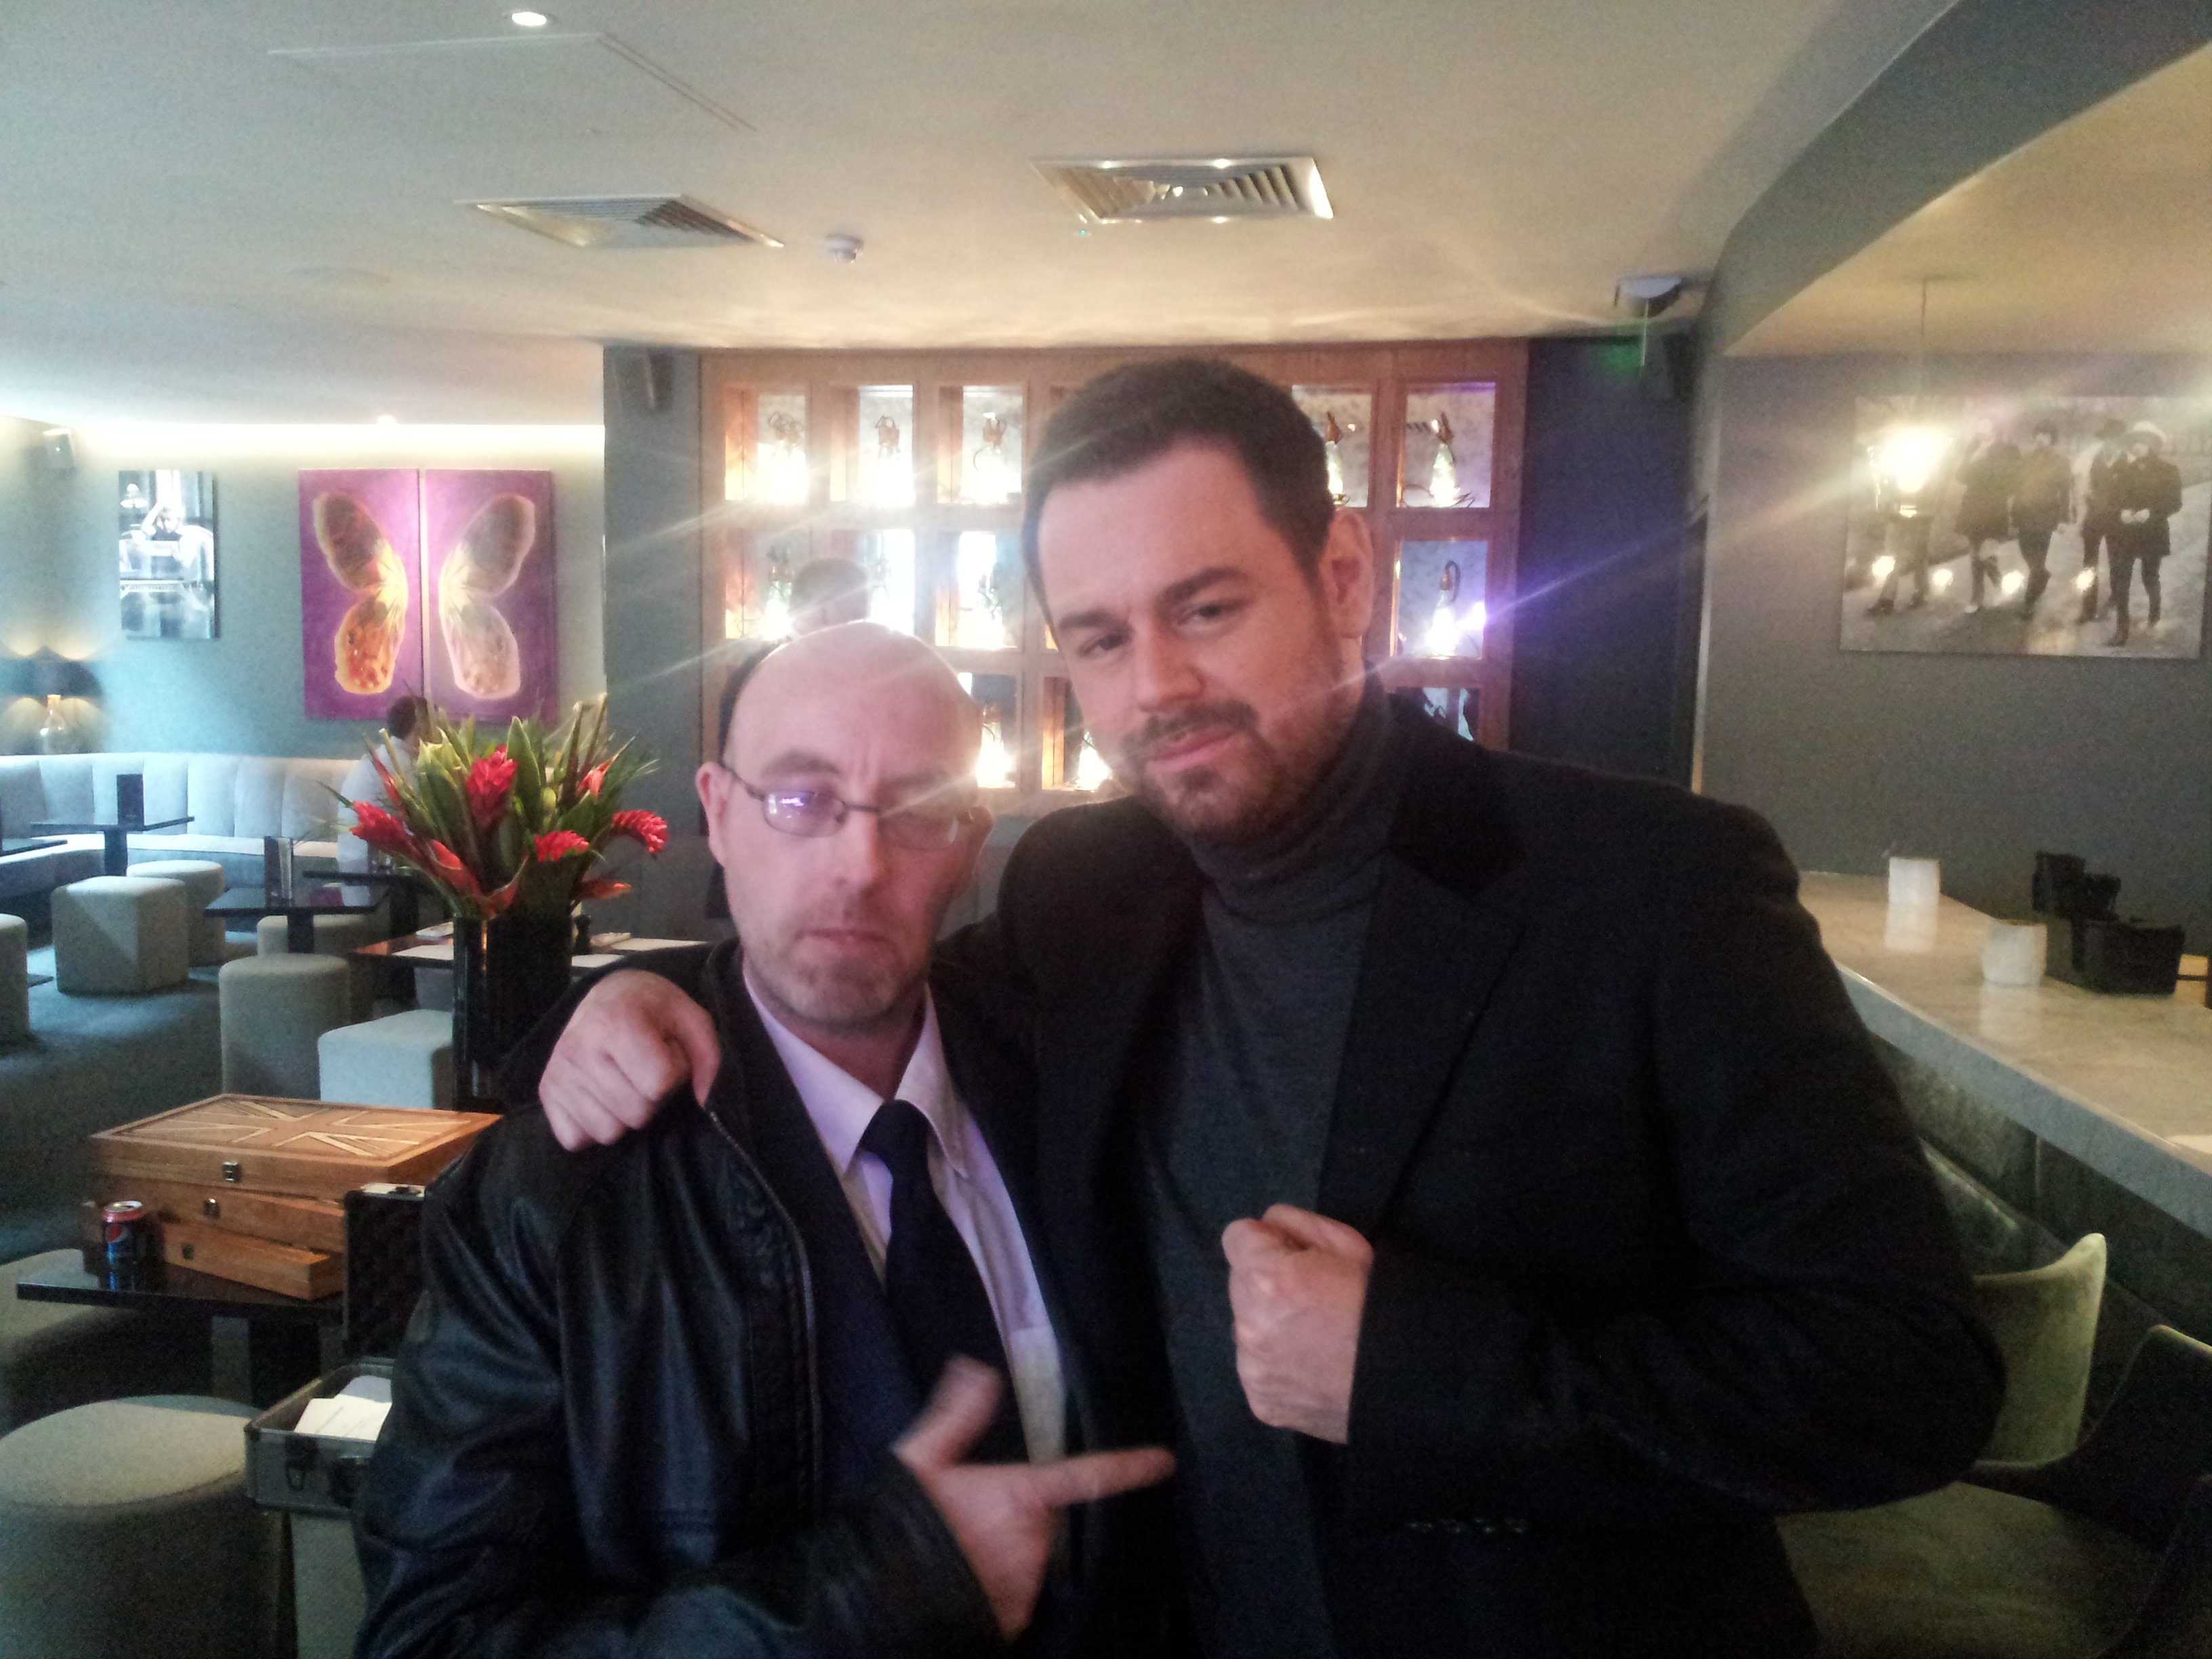 WITH DANNY DYER ON THE SET OF VENDETTA